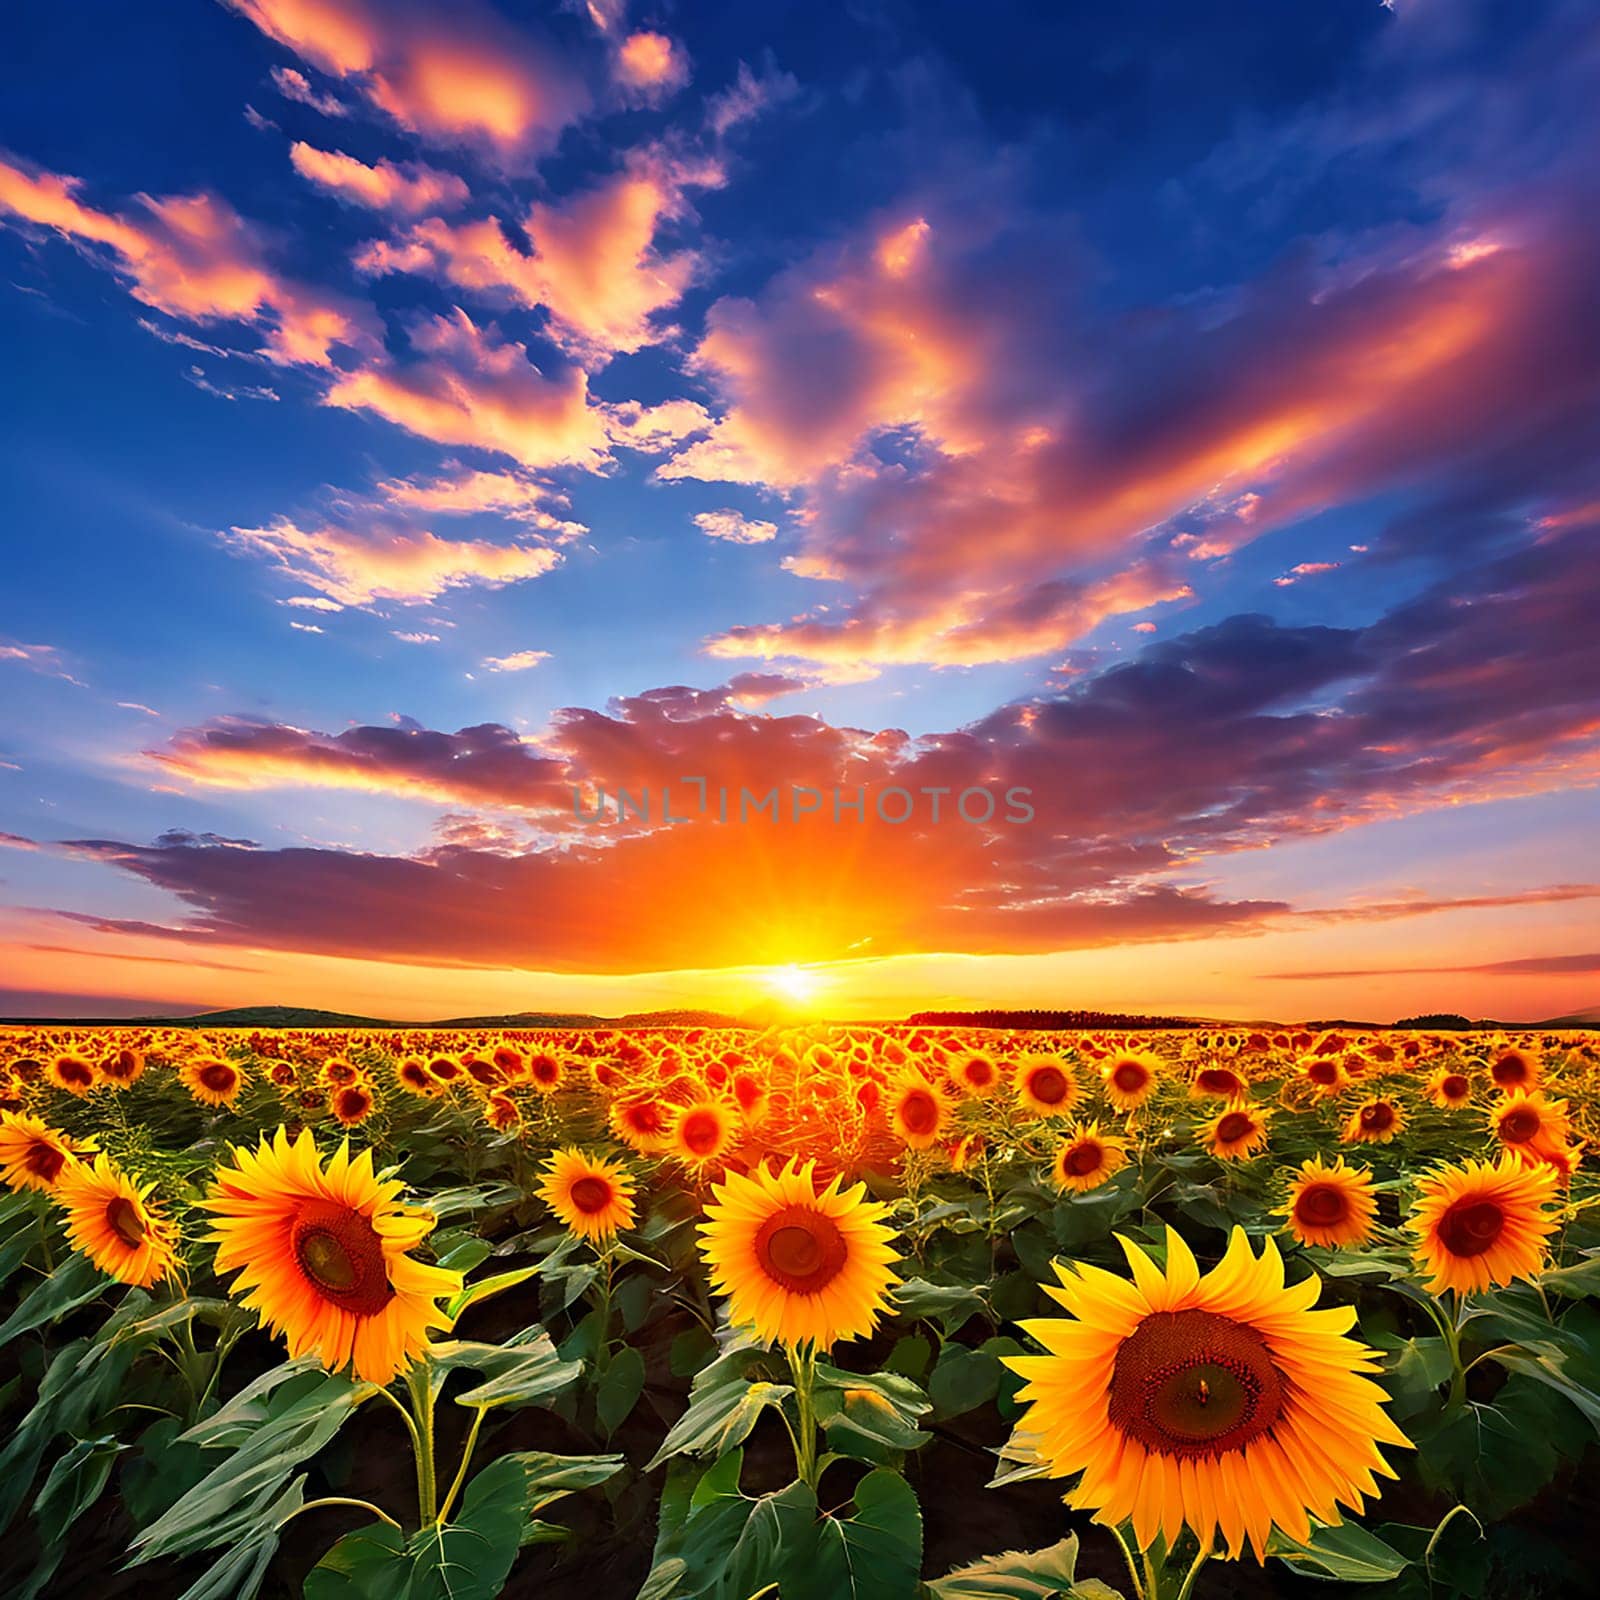 Sunflower Field Bathed in the Warm Glow of the Evening by Petrichor